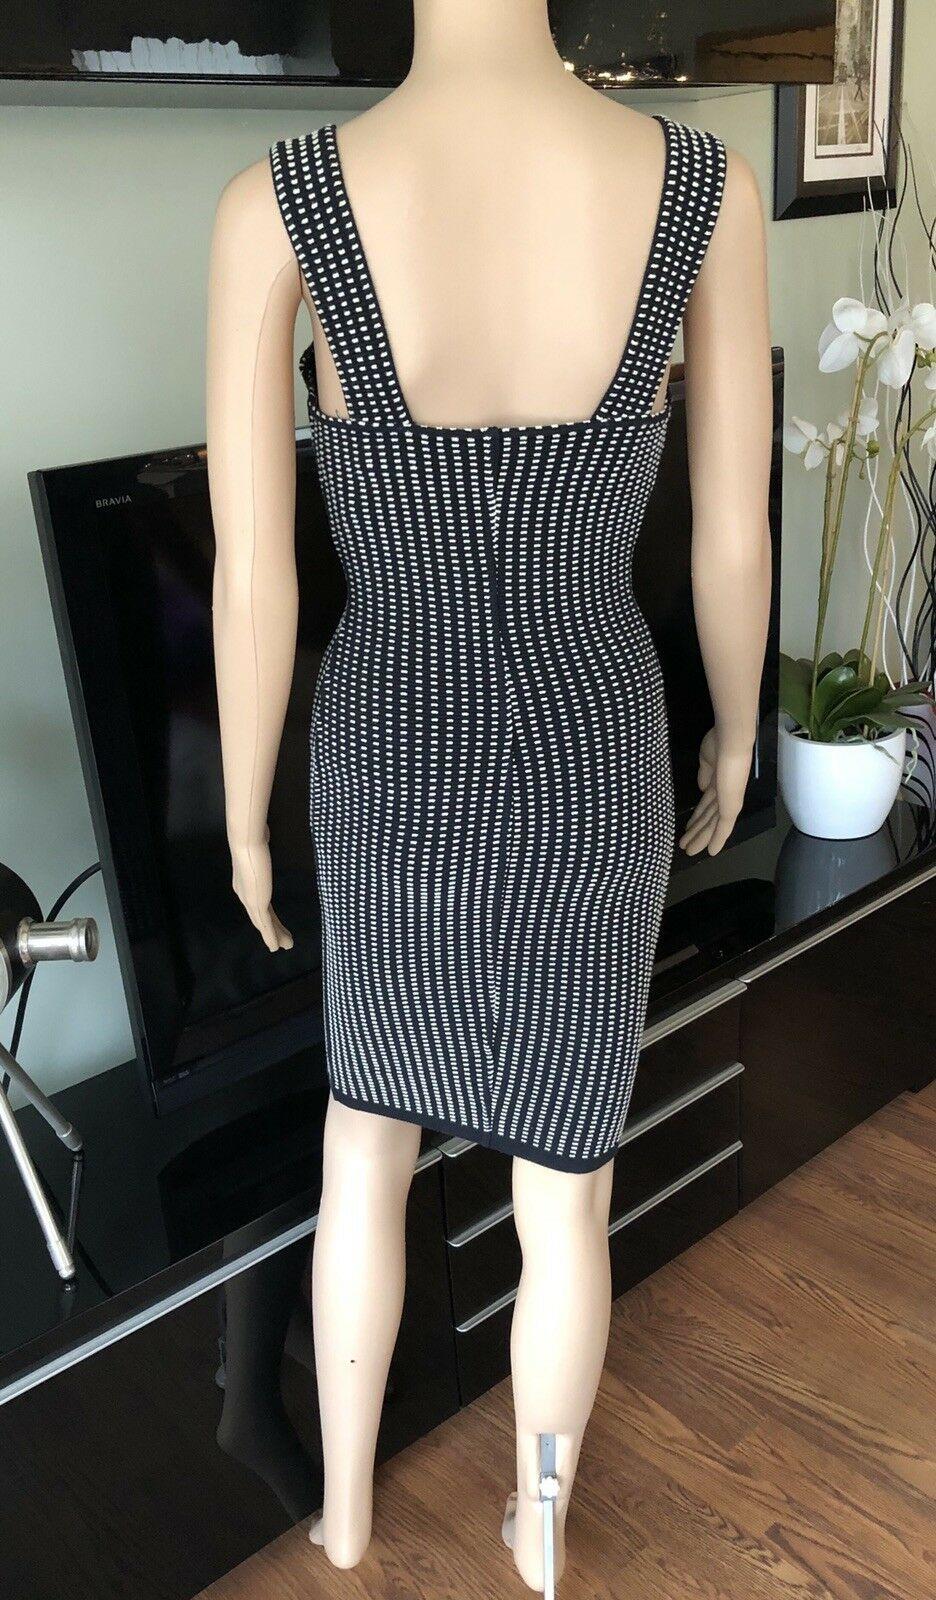 Azzedine Alaia S/S 1990 Runway Vintage Fitted Dress Size XS

Alaïa sleeveless stretch knit dress with square neckline and pattern throughout.

All Eyes on Alaïa
For the last half-century, the world’s most fashionable and adventuresome women have